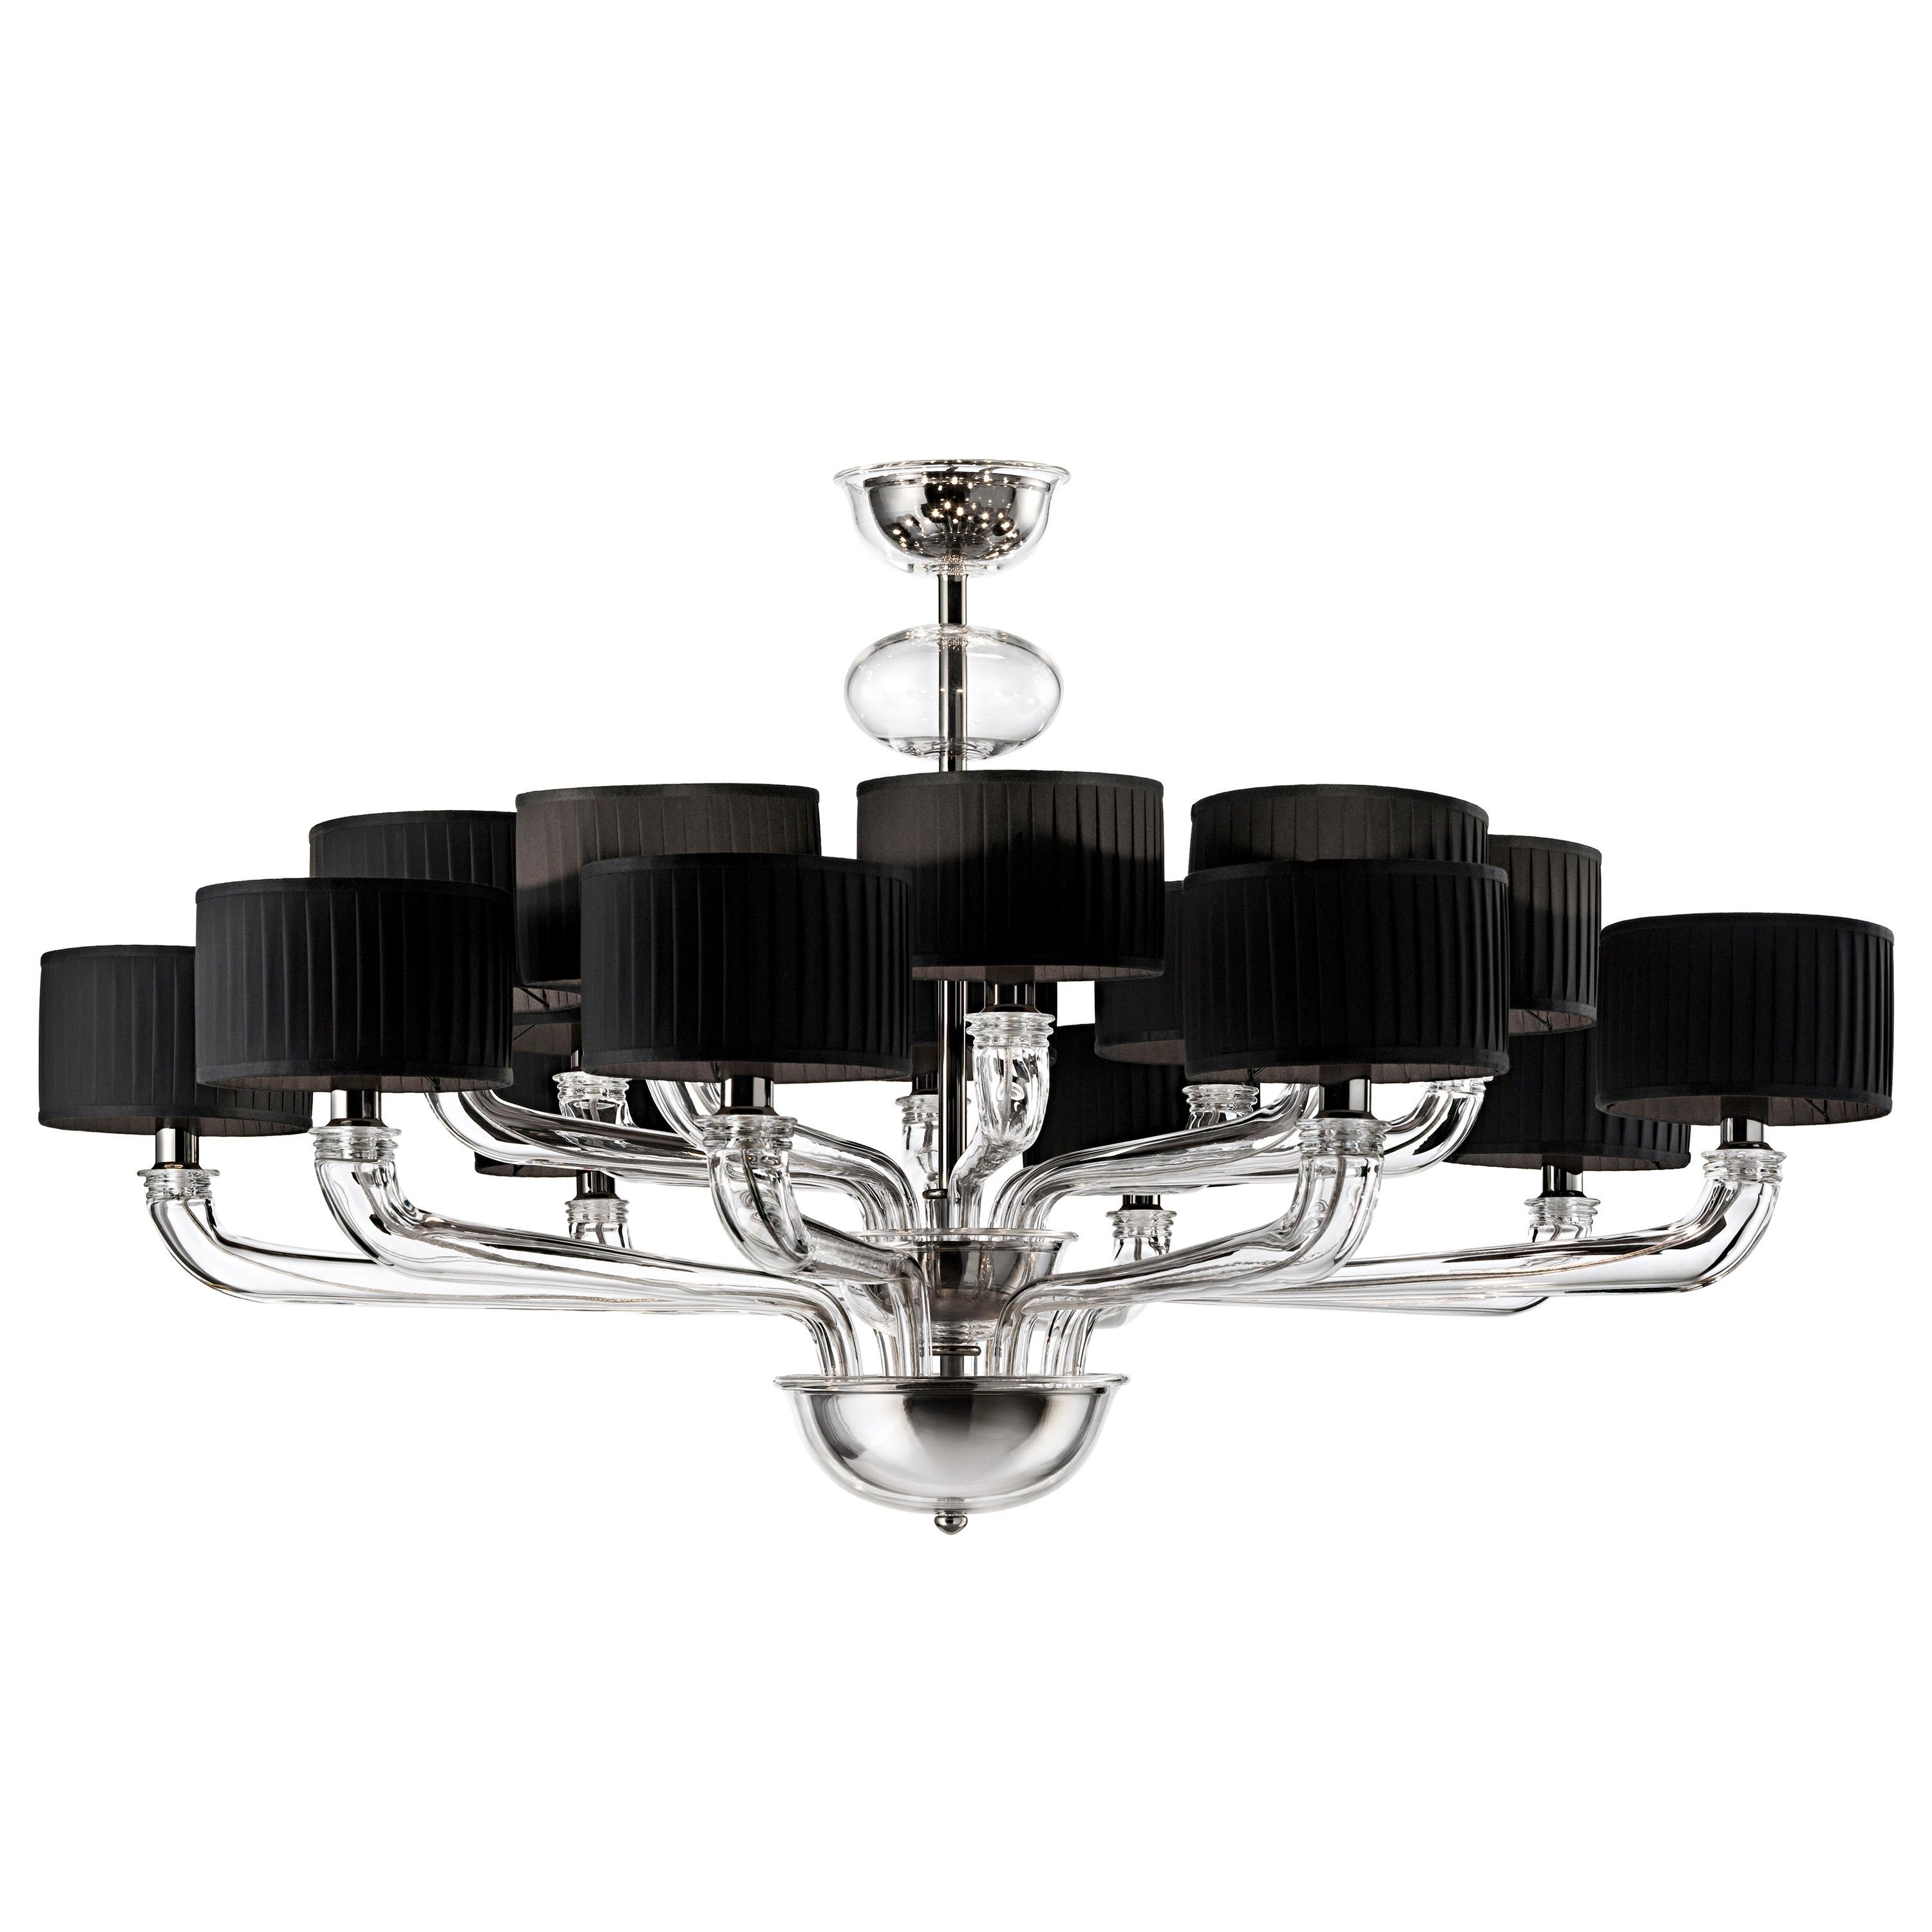 Clear (Crystal_CC) Babylon 5599 16 Chandelier in Dark Chrome and Black Shade, by Barovier&Toso